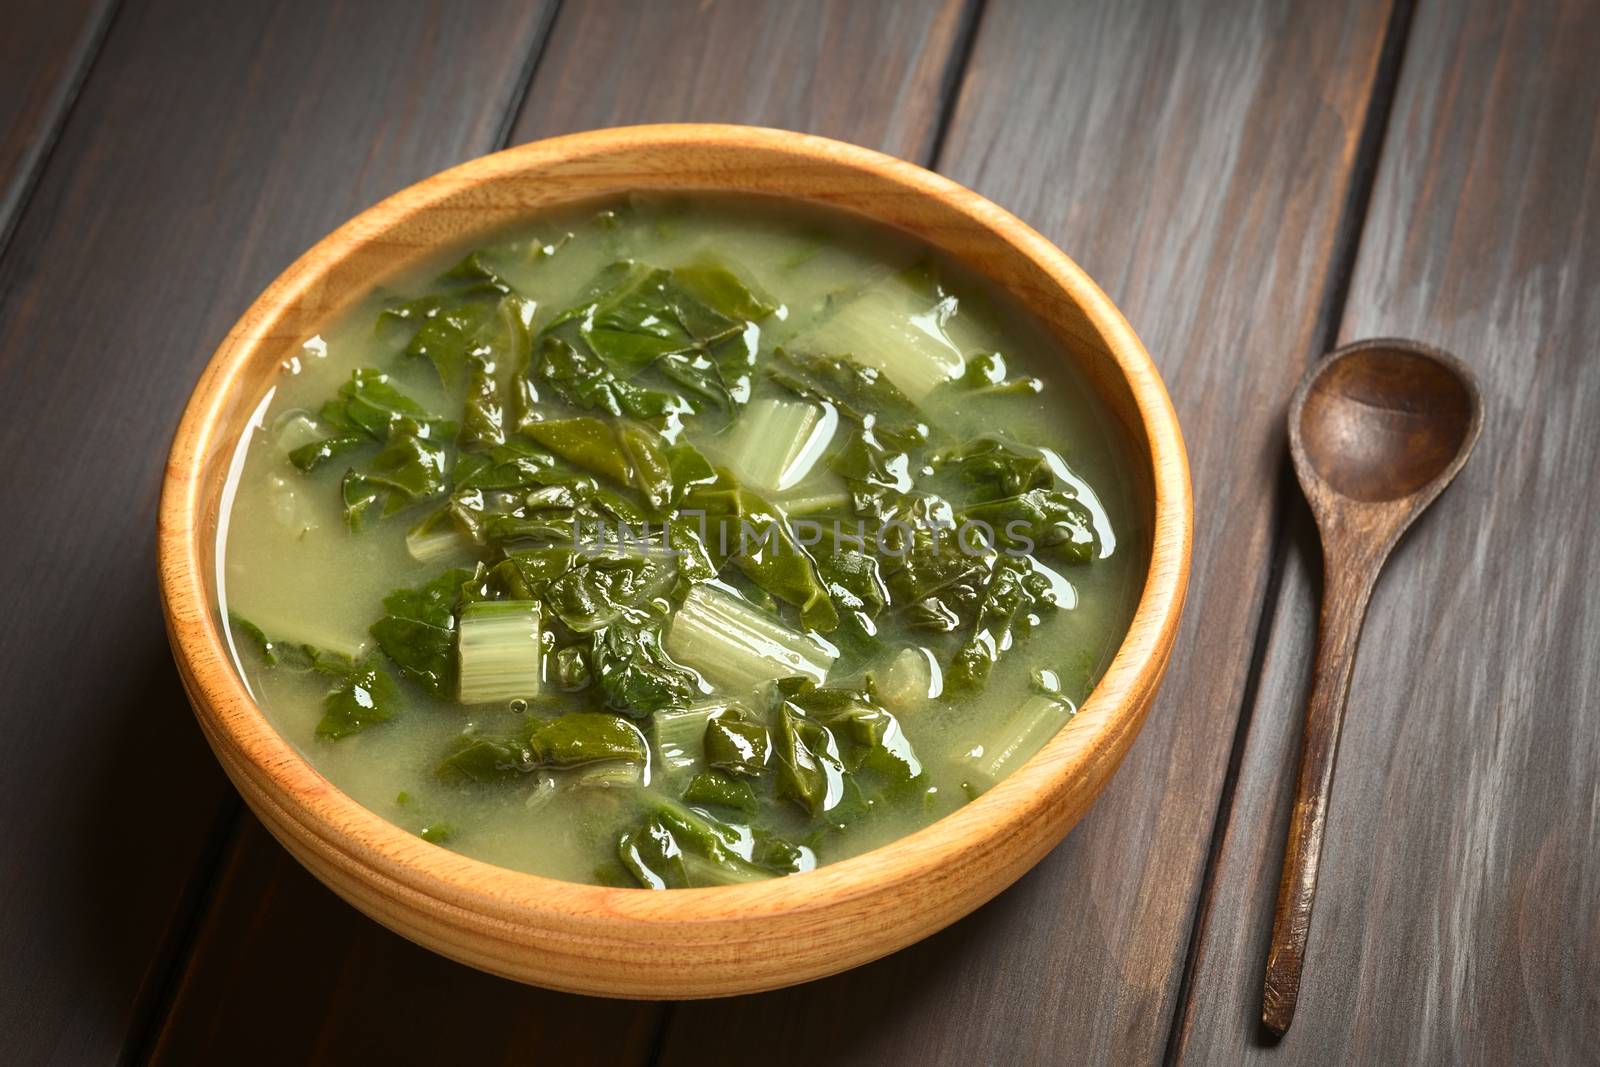 Chard soup in wooden bowl with a small wooden spoon, photographed on dark wood with natural light (Selective Focus, Focus one third into the soup)